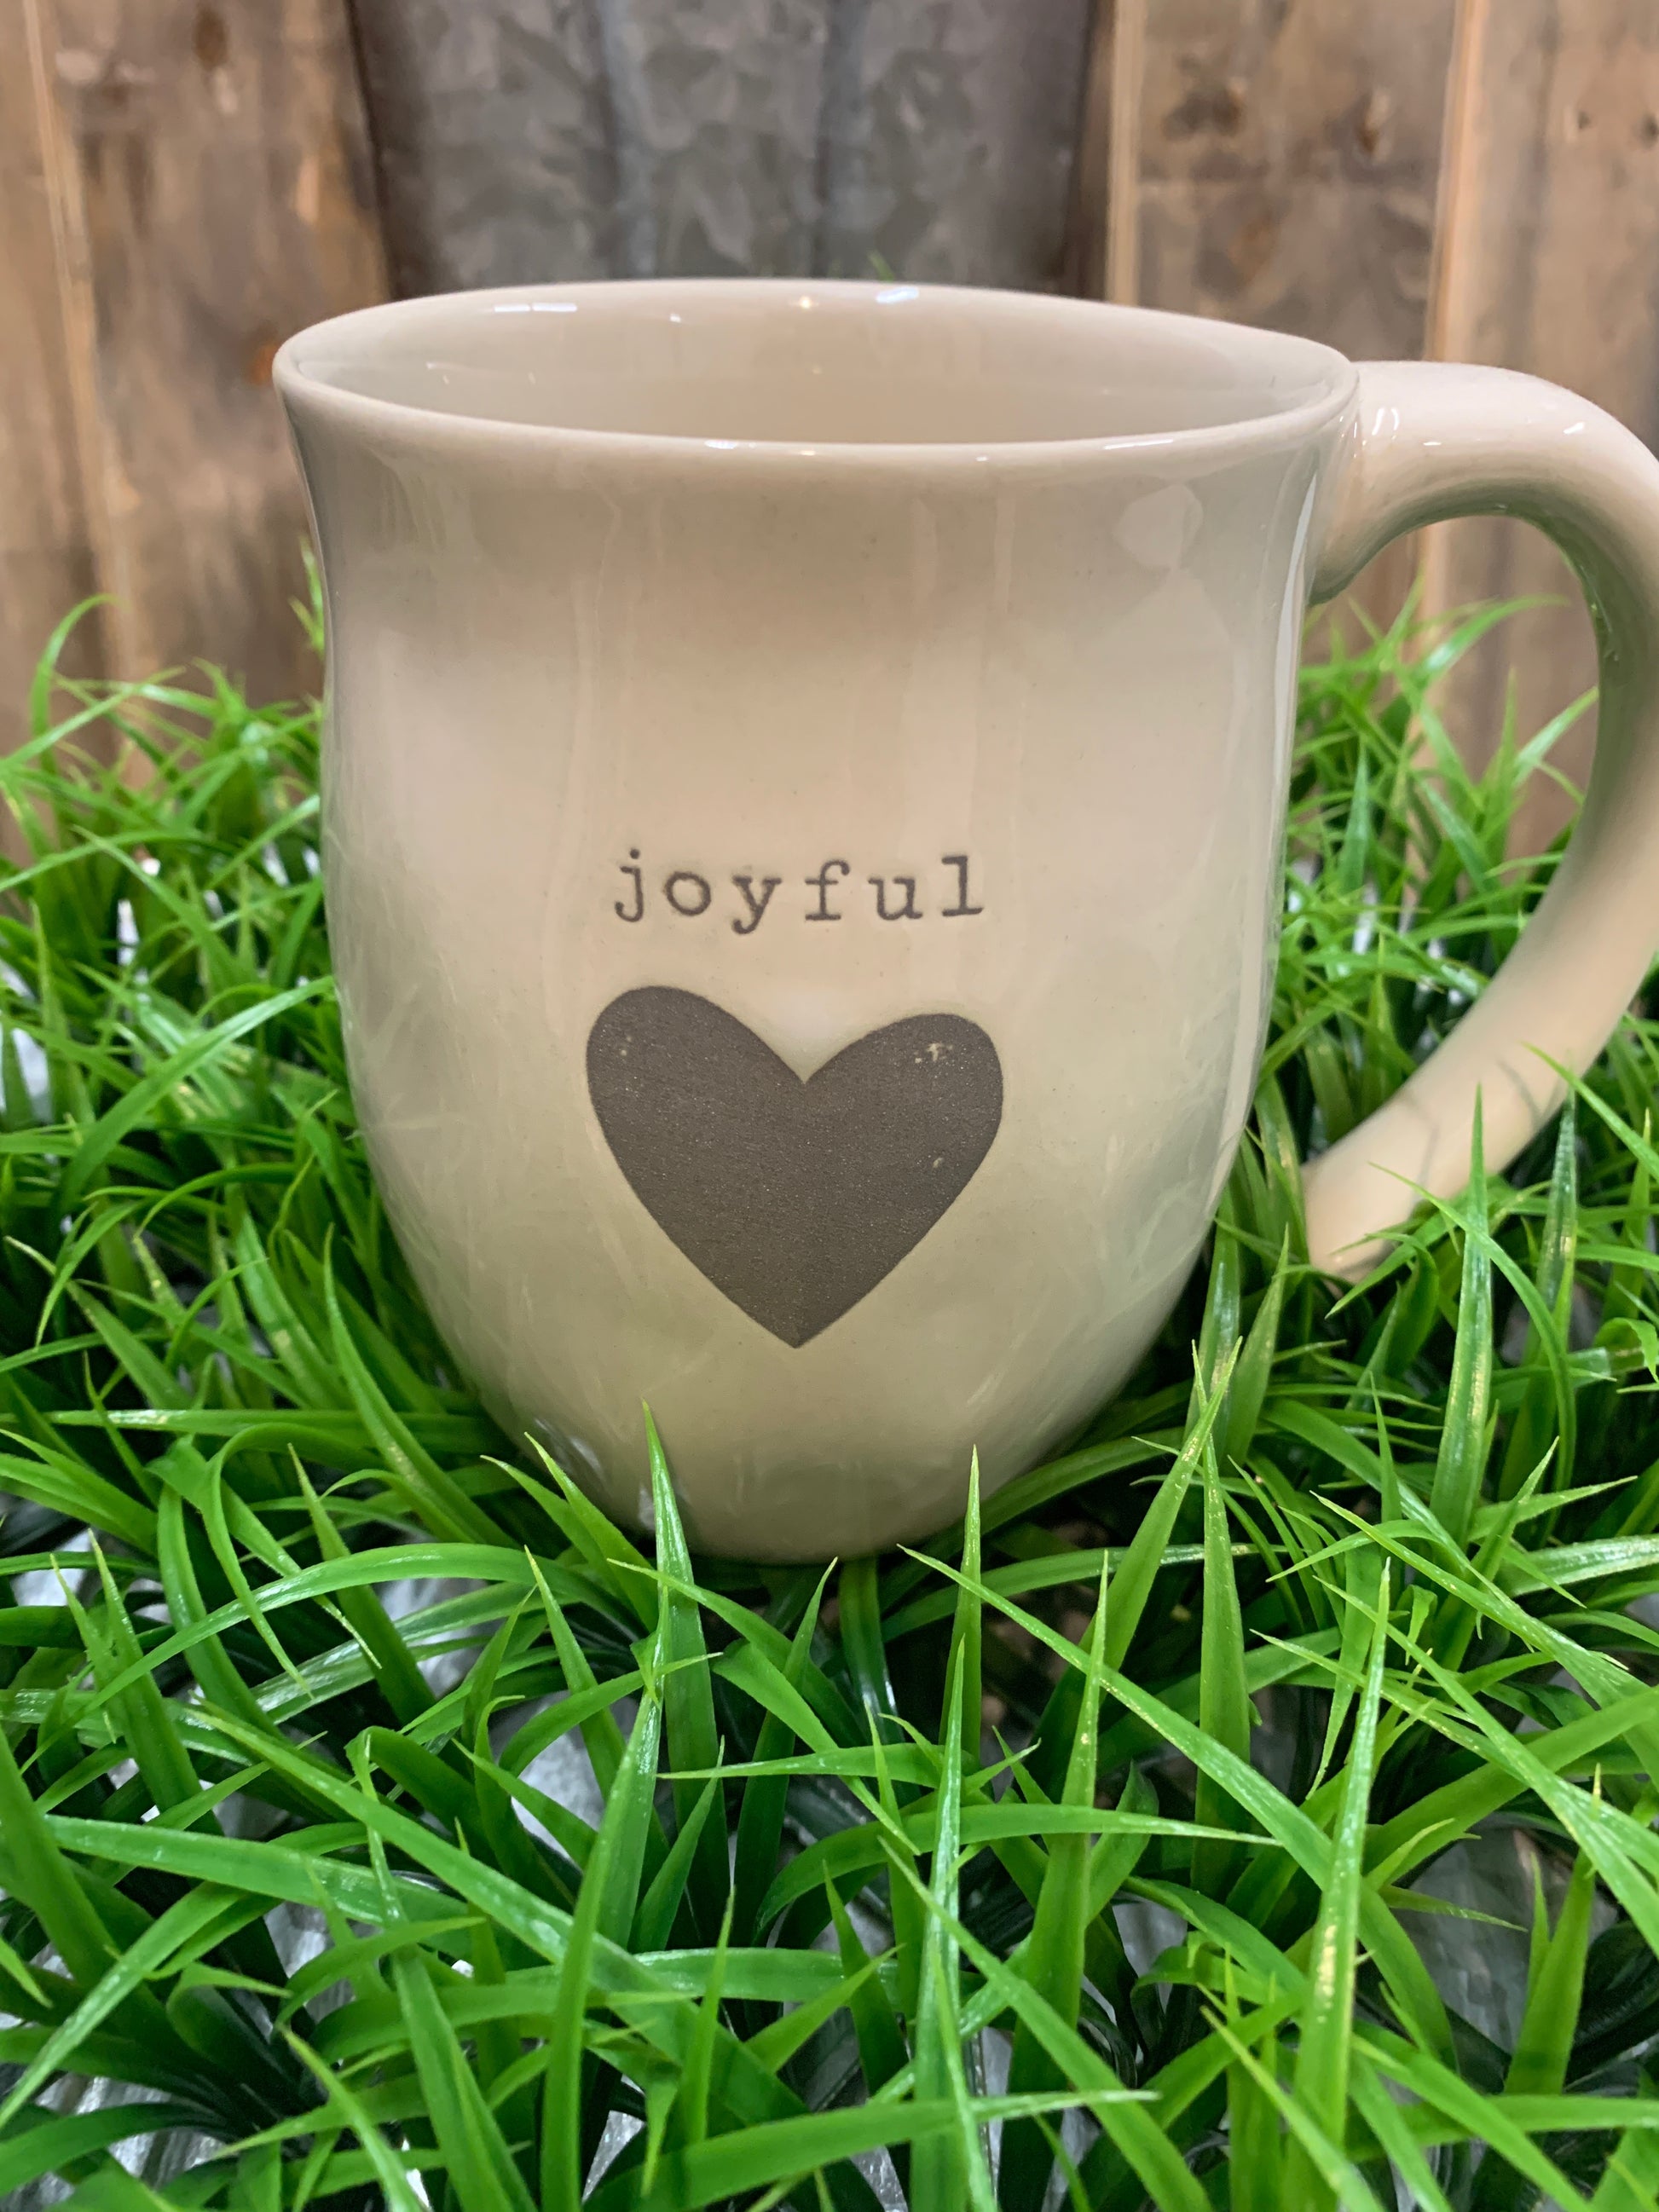 Holding a hot beverage in both hands is a ritual of calm. It gives one time to relax, reflect and think of the uplifting and memorable experiences in life. The Joyful Heart Mug provides its owner with cozy reflection time and calm.